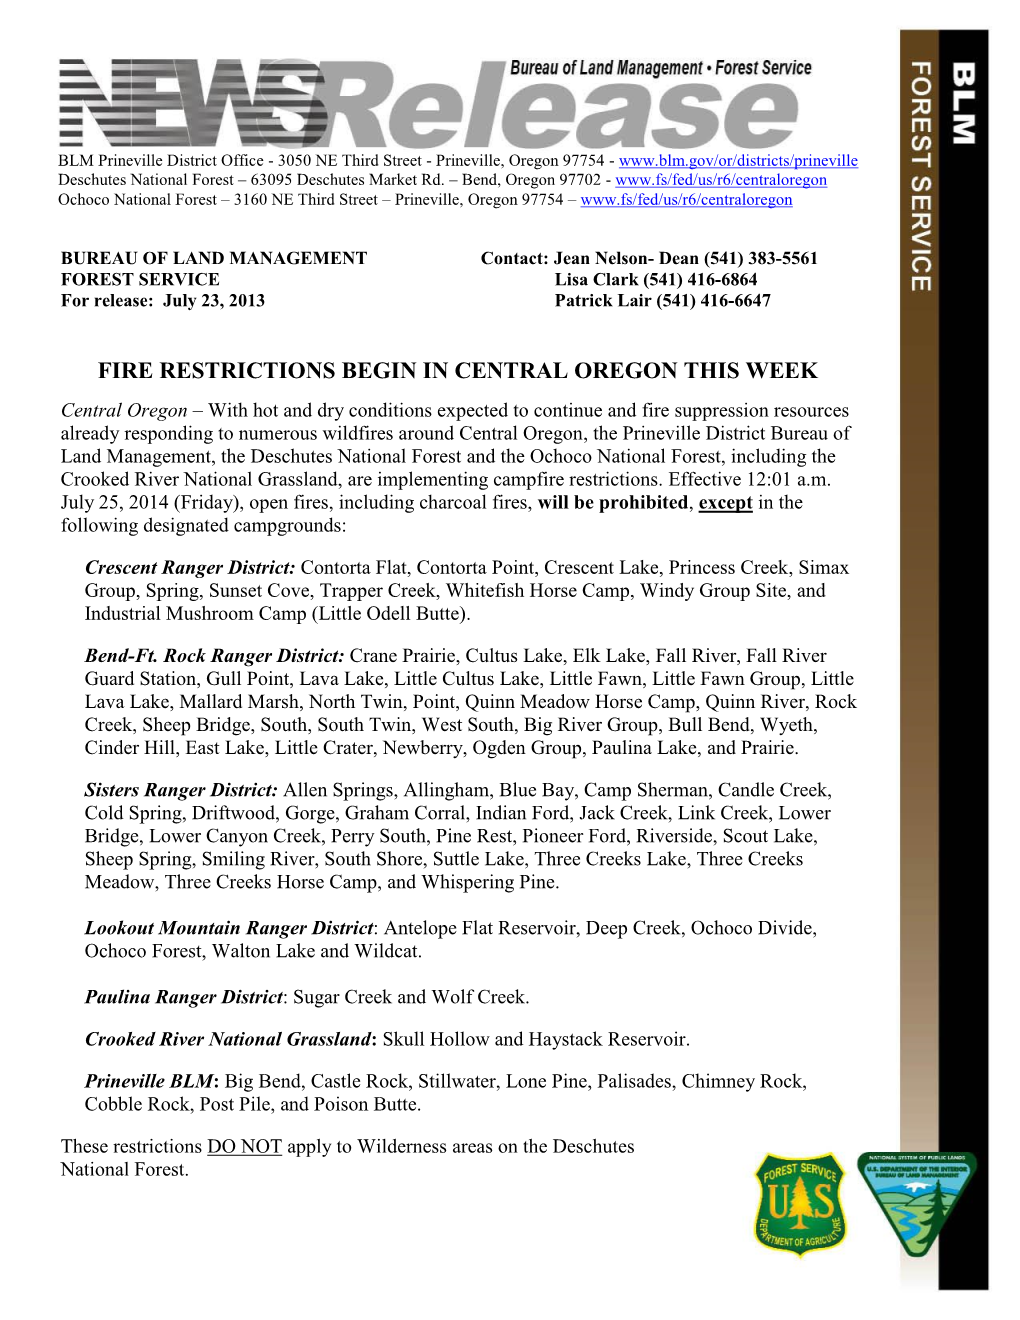 Fire Restrictions Begin in Central Oregon This Week